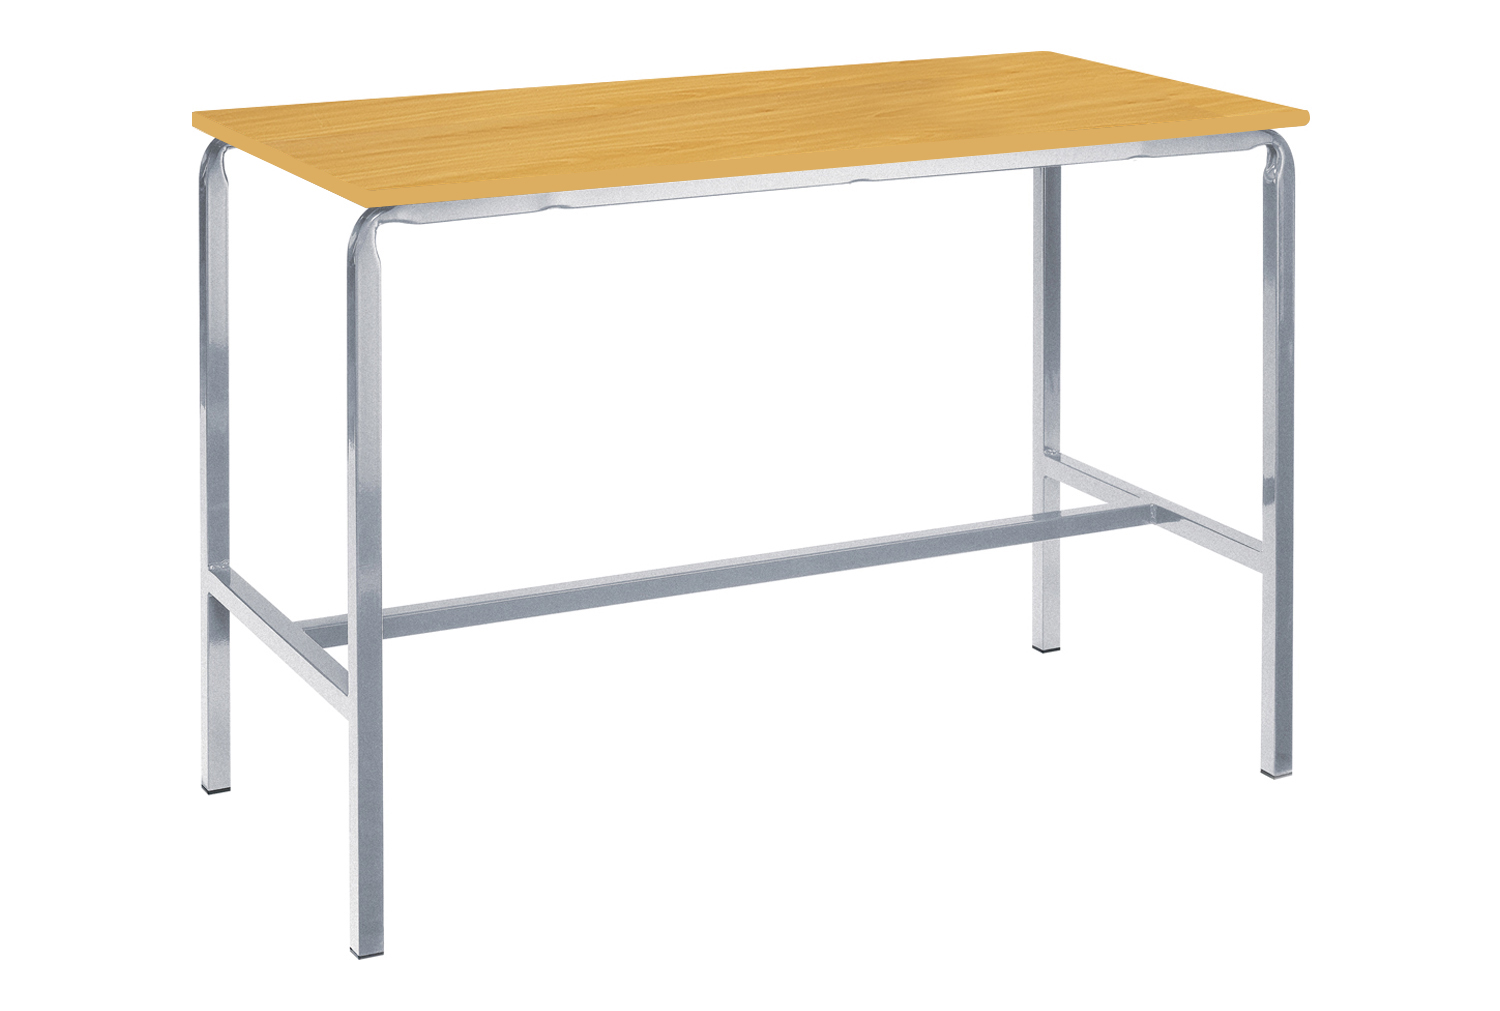 Qty 2 - Crush Bent Craft Tables (MDF Edge), 120wx60dx95h (cm), Speckled Grey Frame, Grey